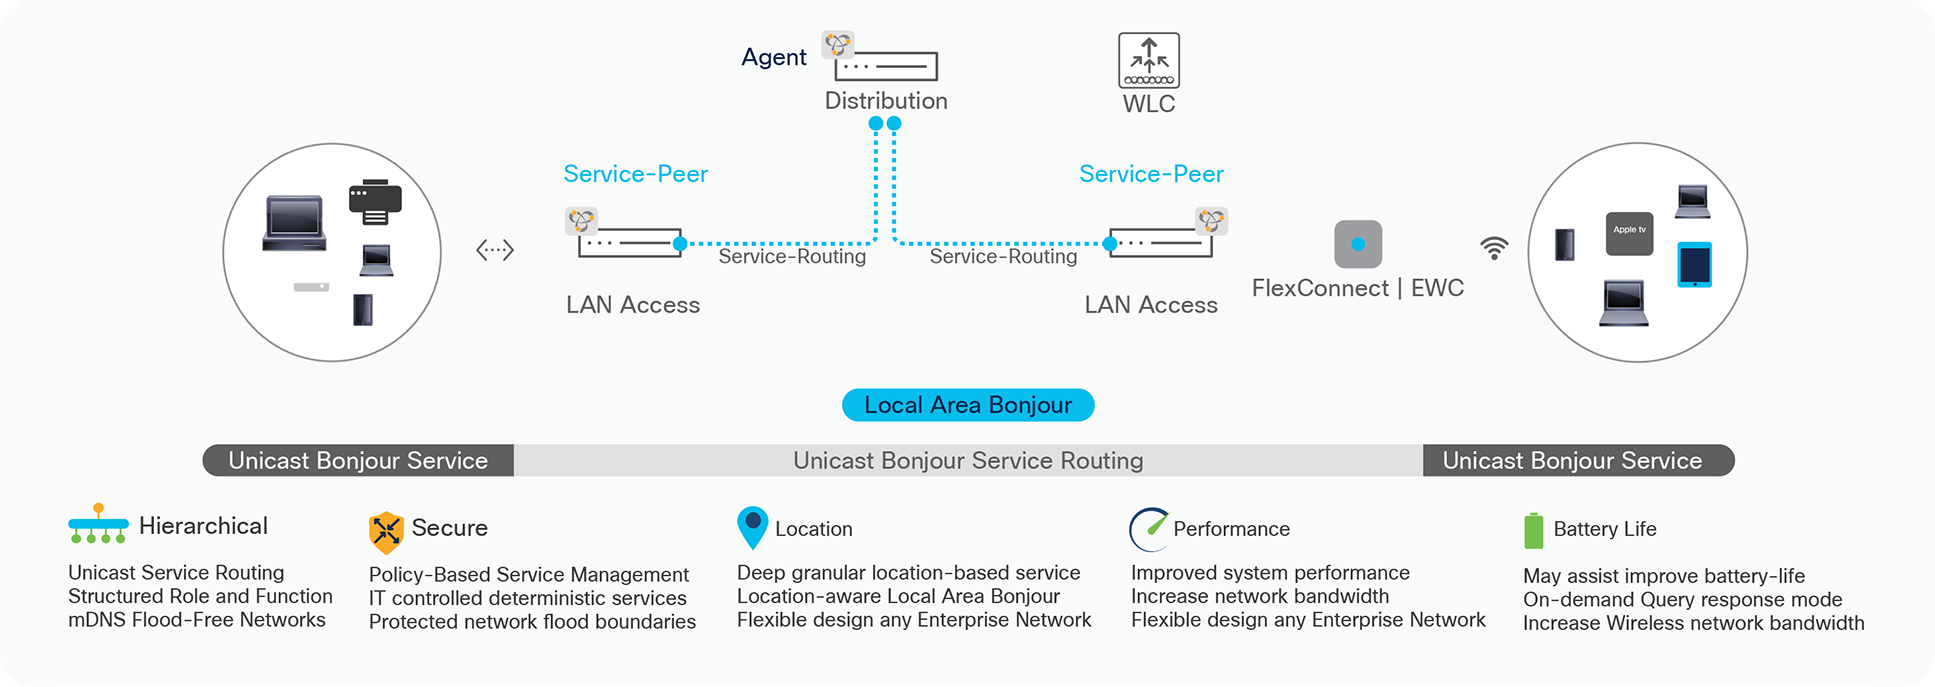 Cisco DNA Service for Bonjour Solution for Wireless FlexConnect and EWC